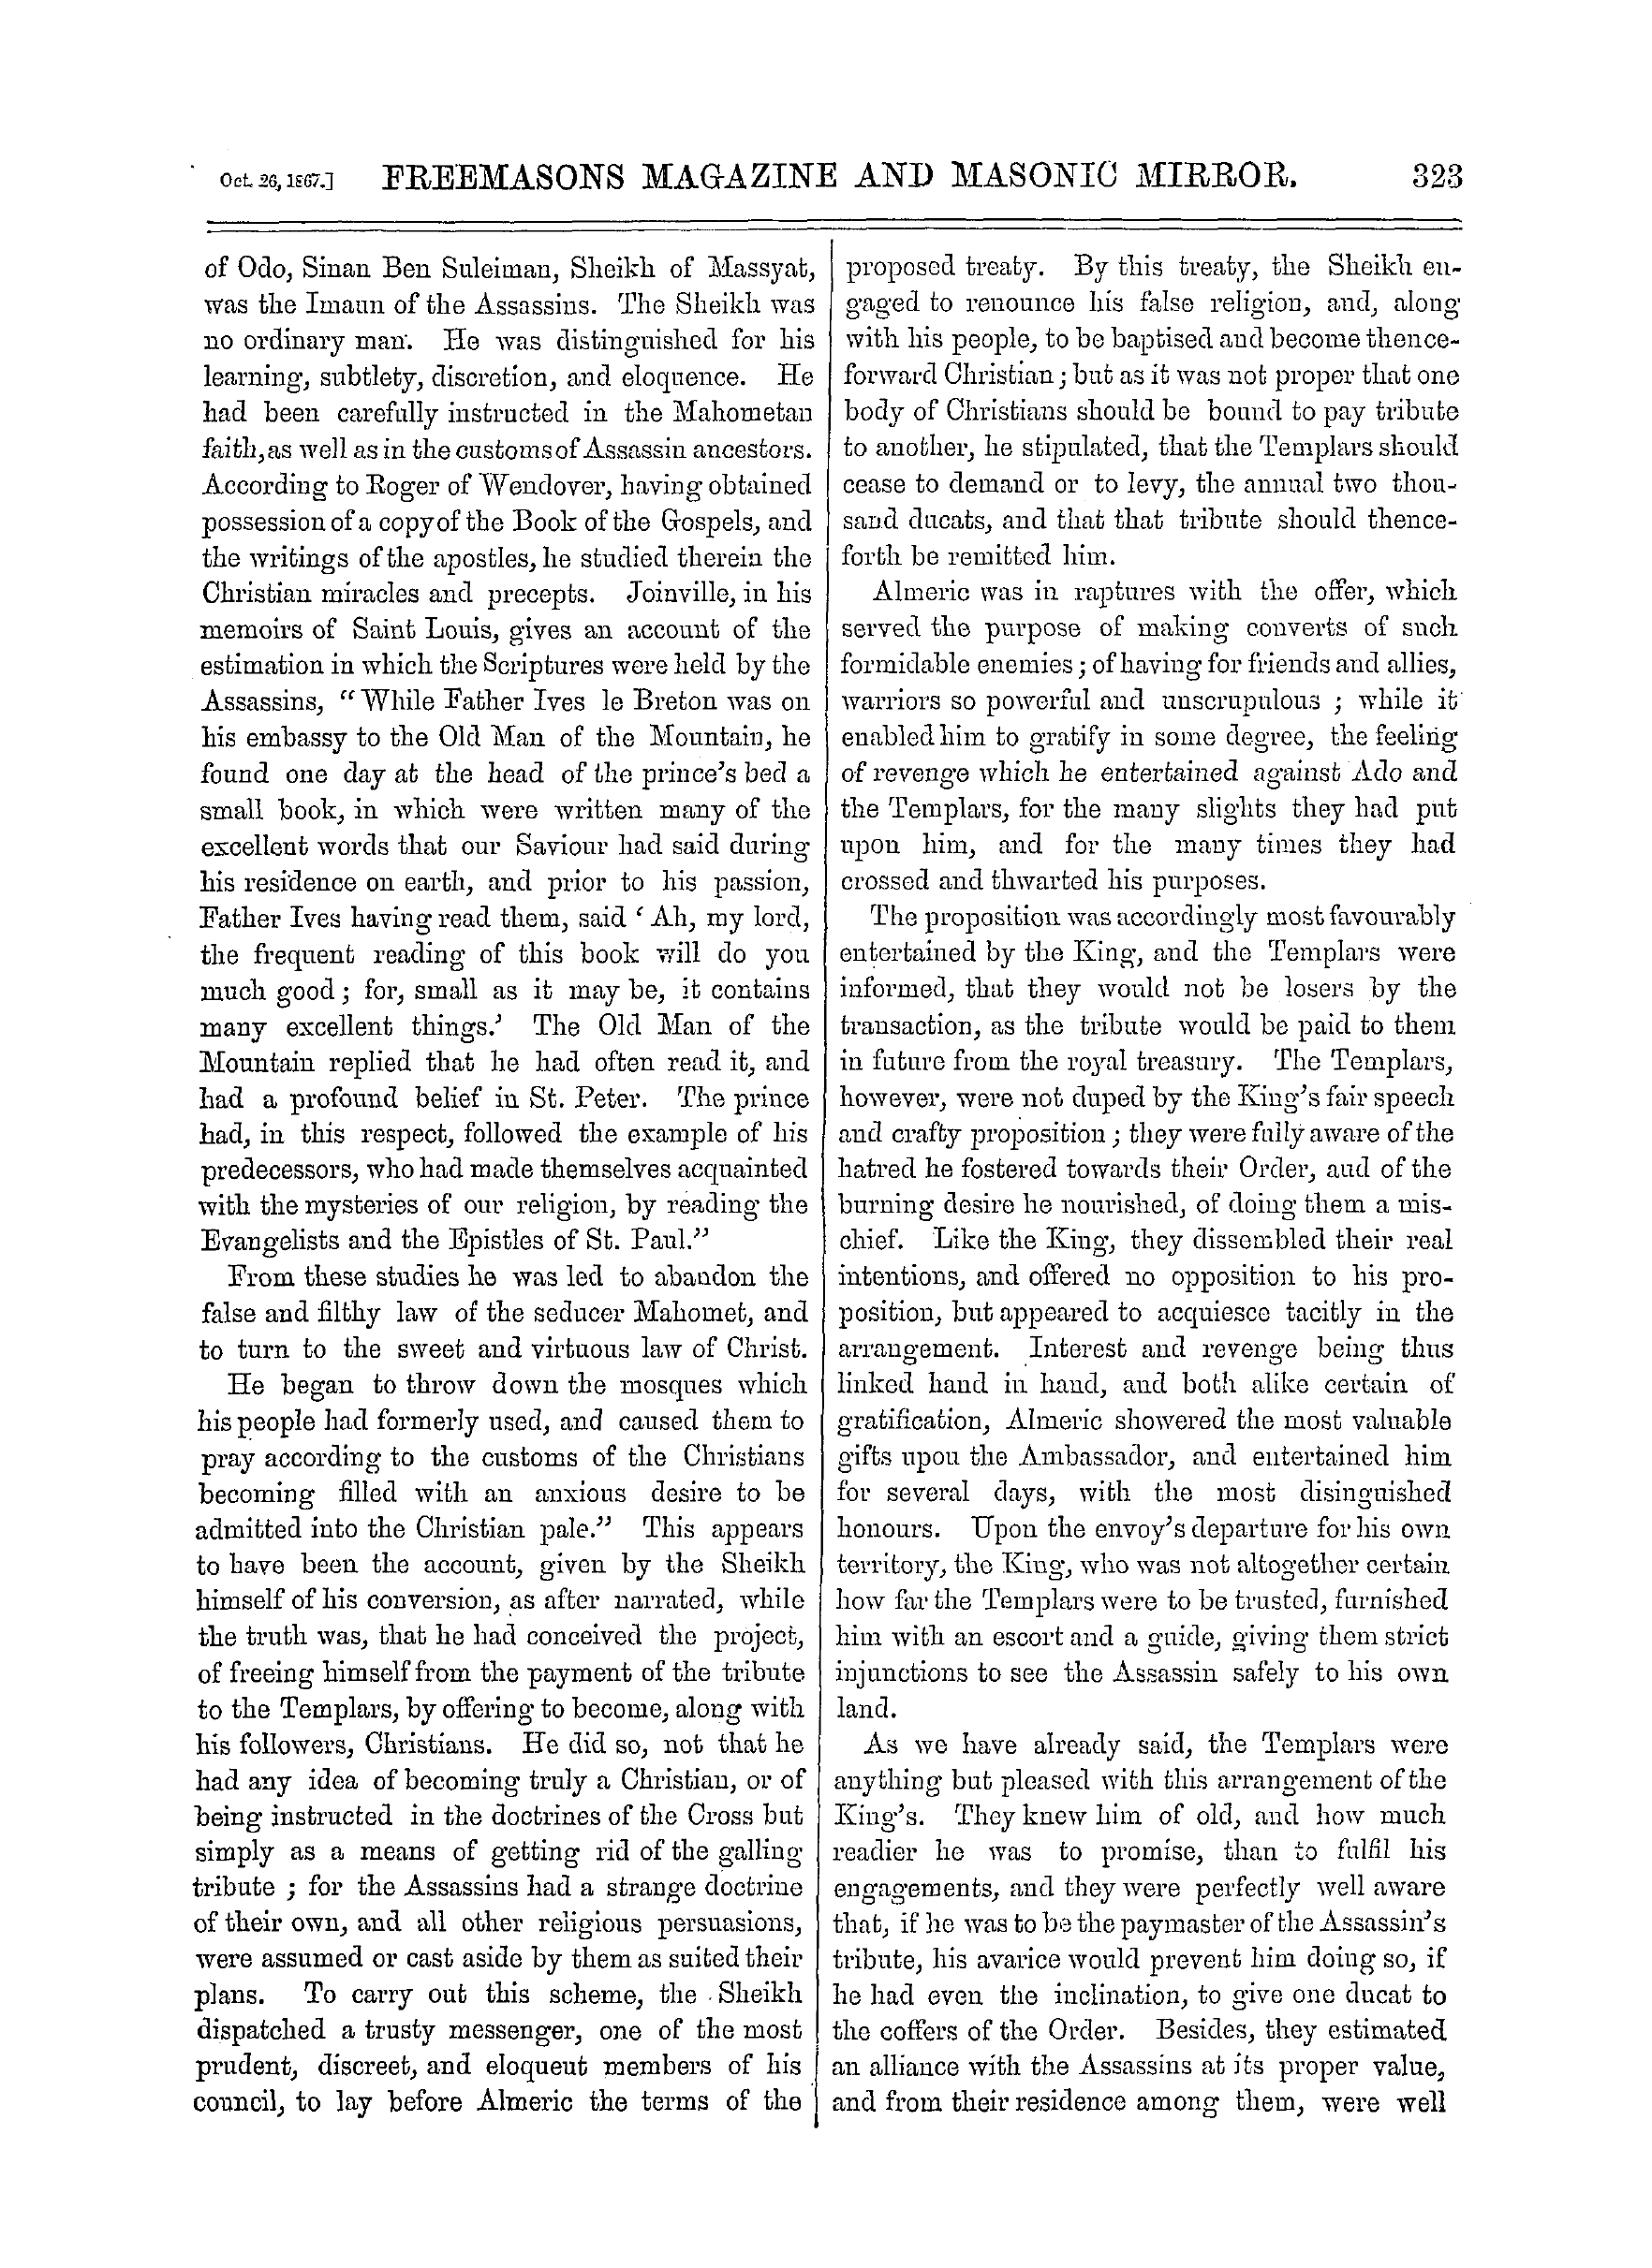 Page 3